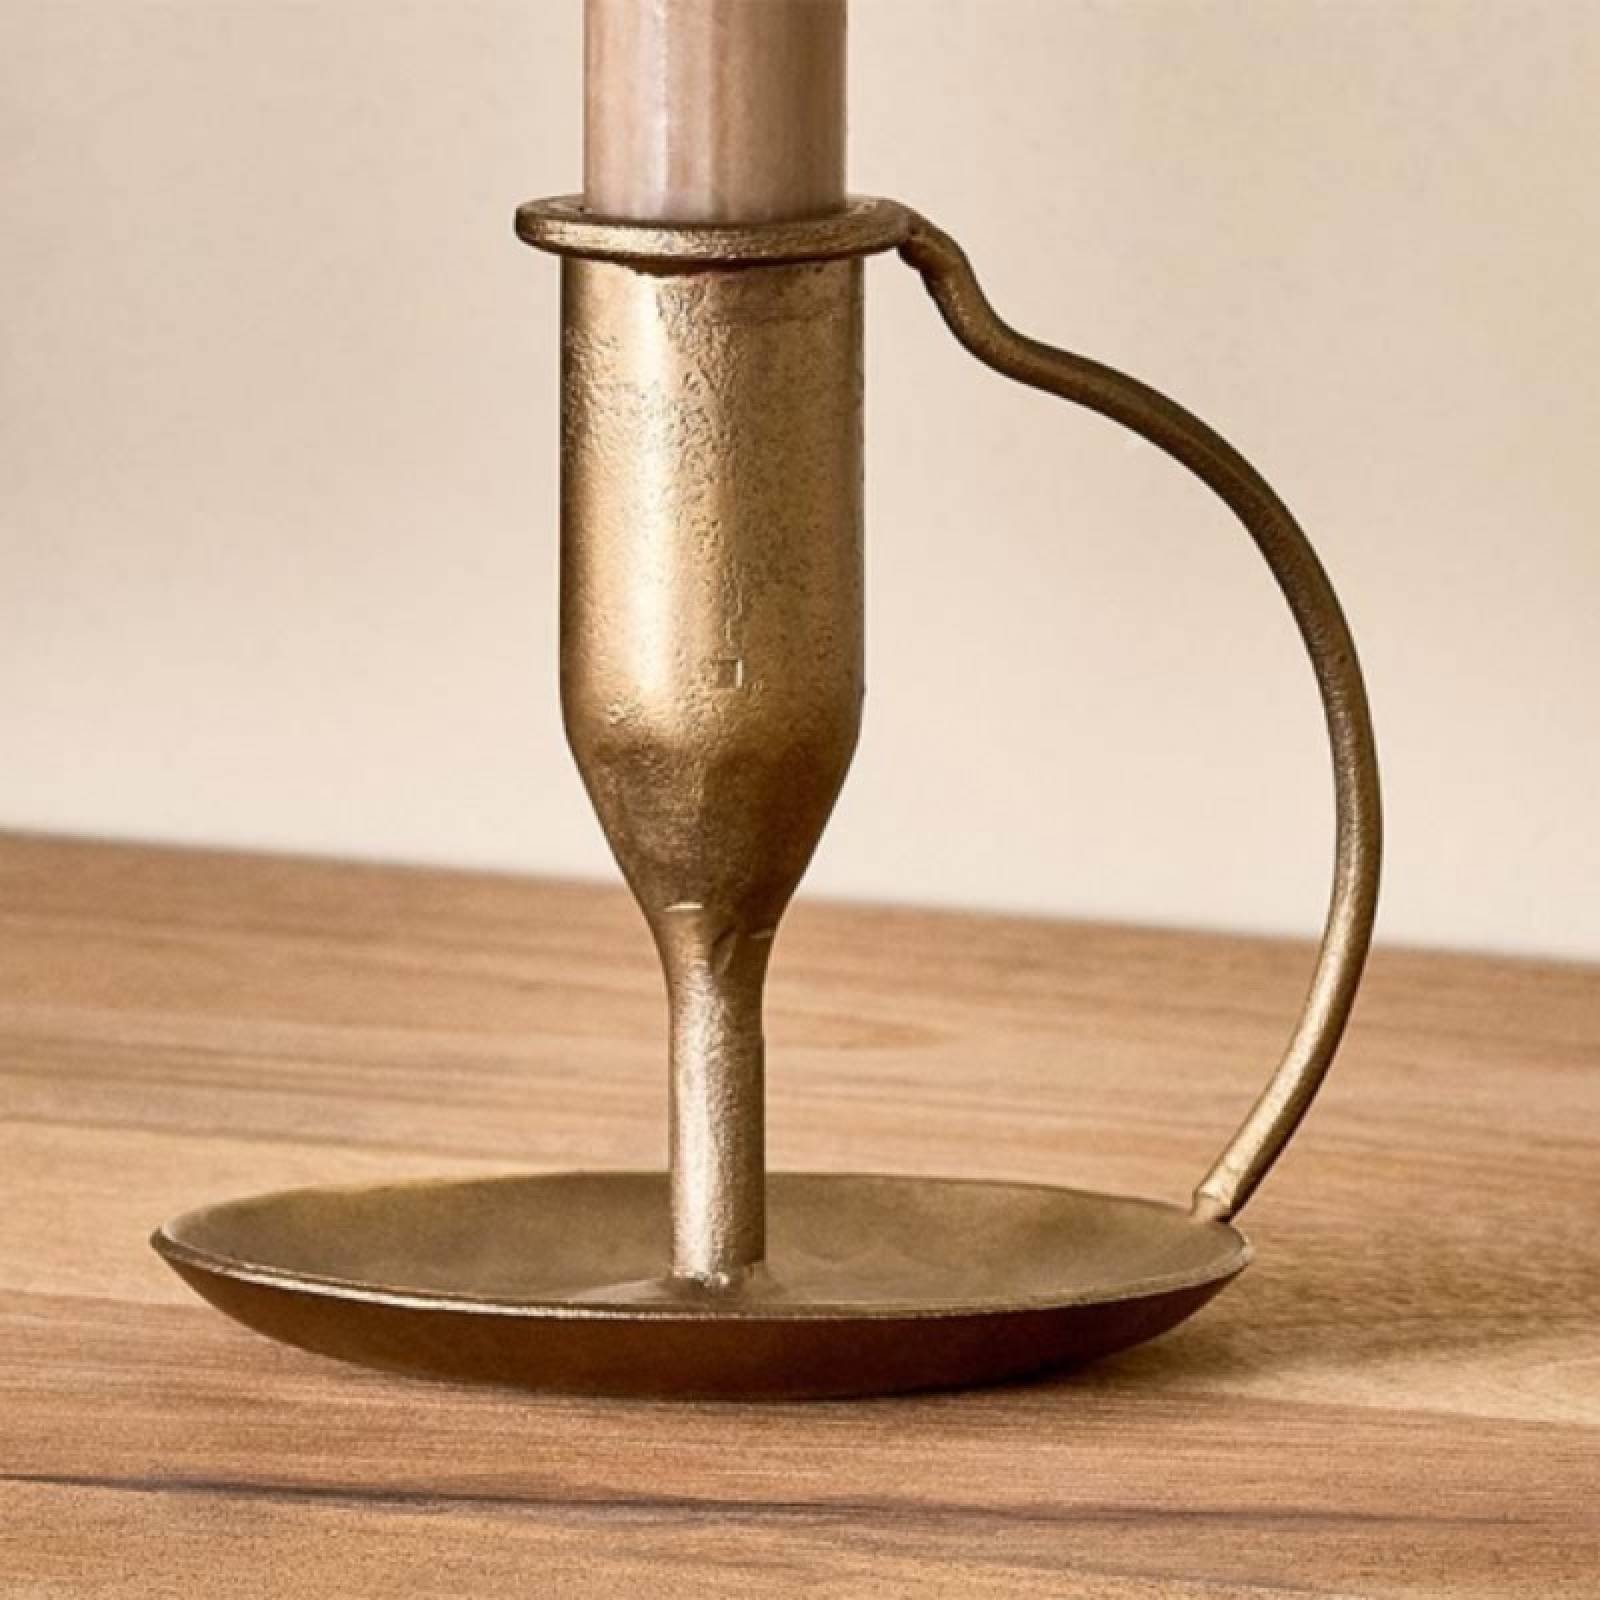 Slim Candlestick Holder With Handle In Antique Brass thumbnails